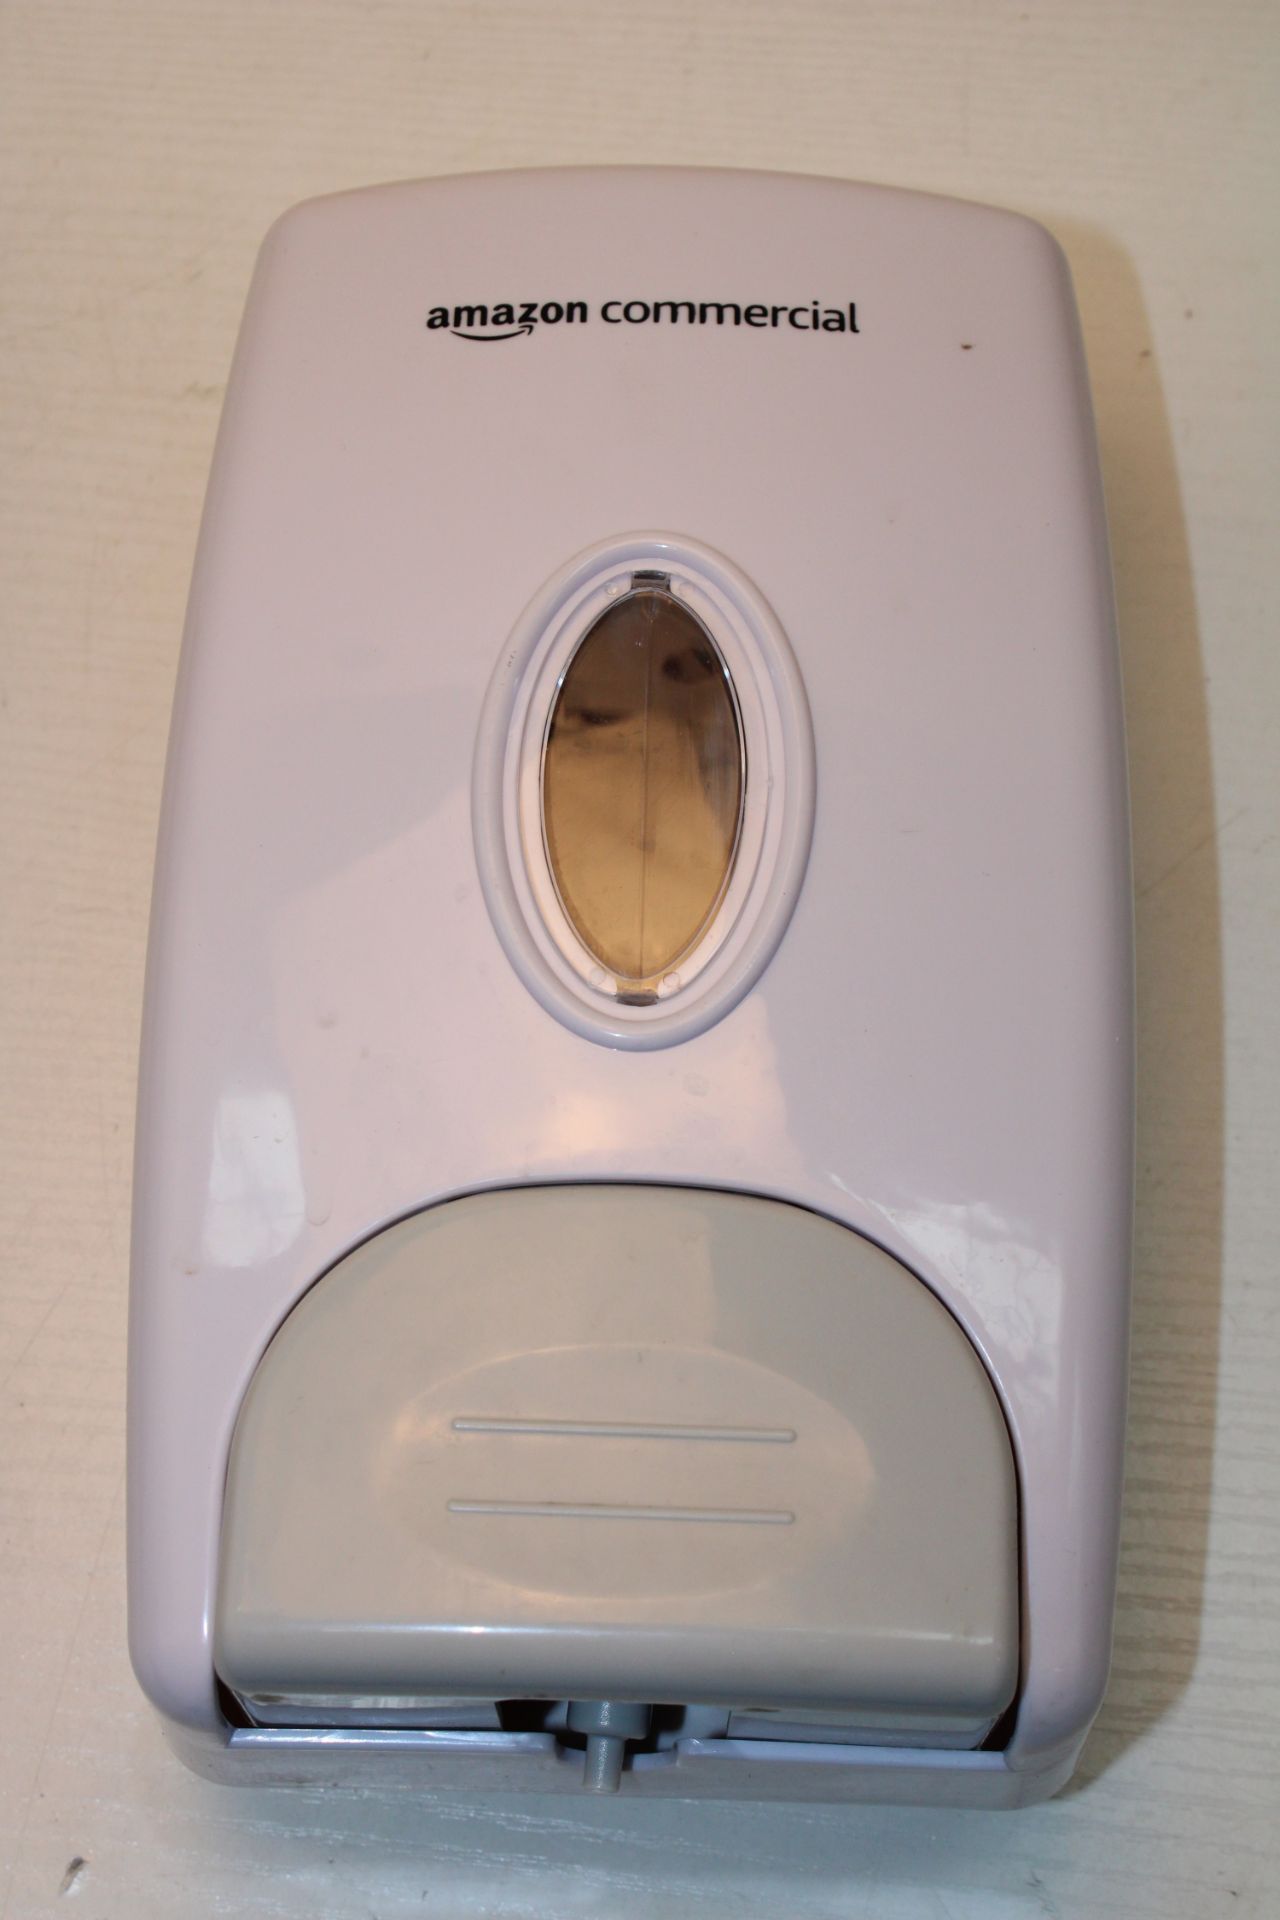 3X BOXED AMAZON COMMERCIAL SOAP DISPENSERSCondition ReportAppraisal Available on Request- All